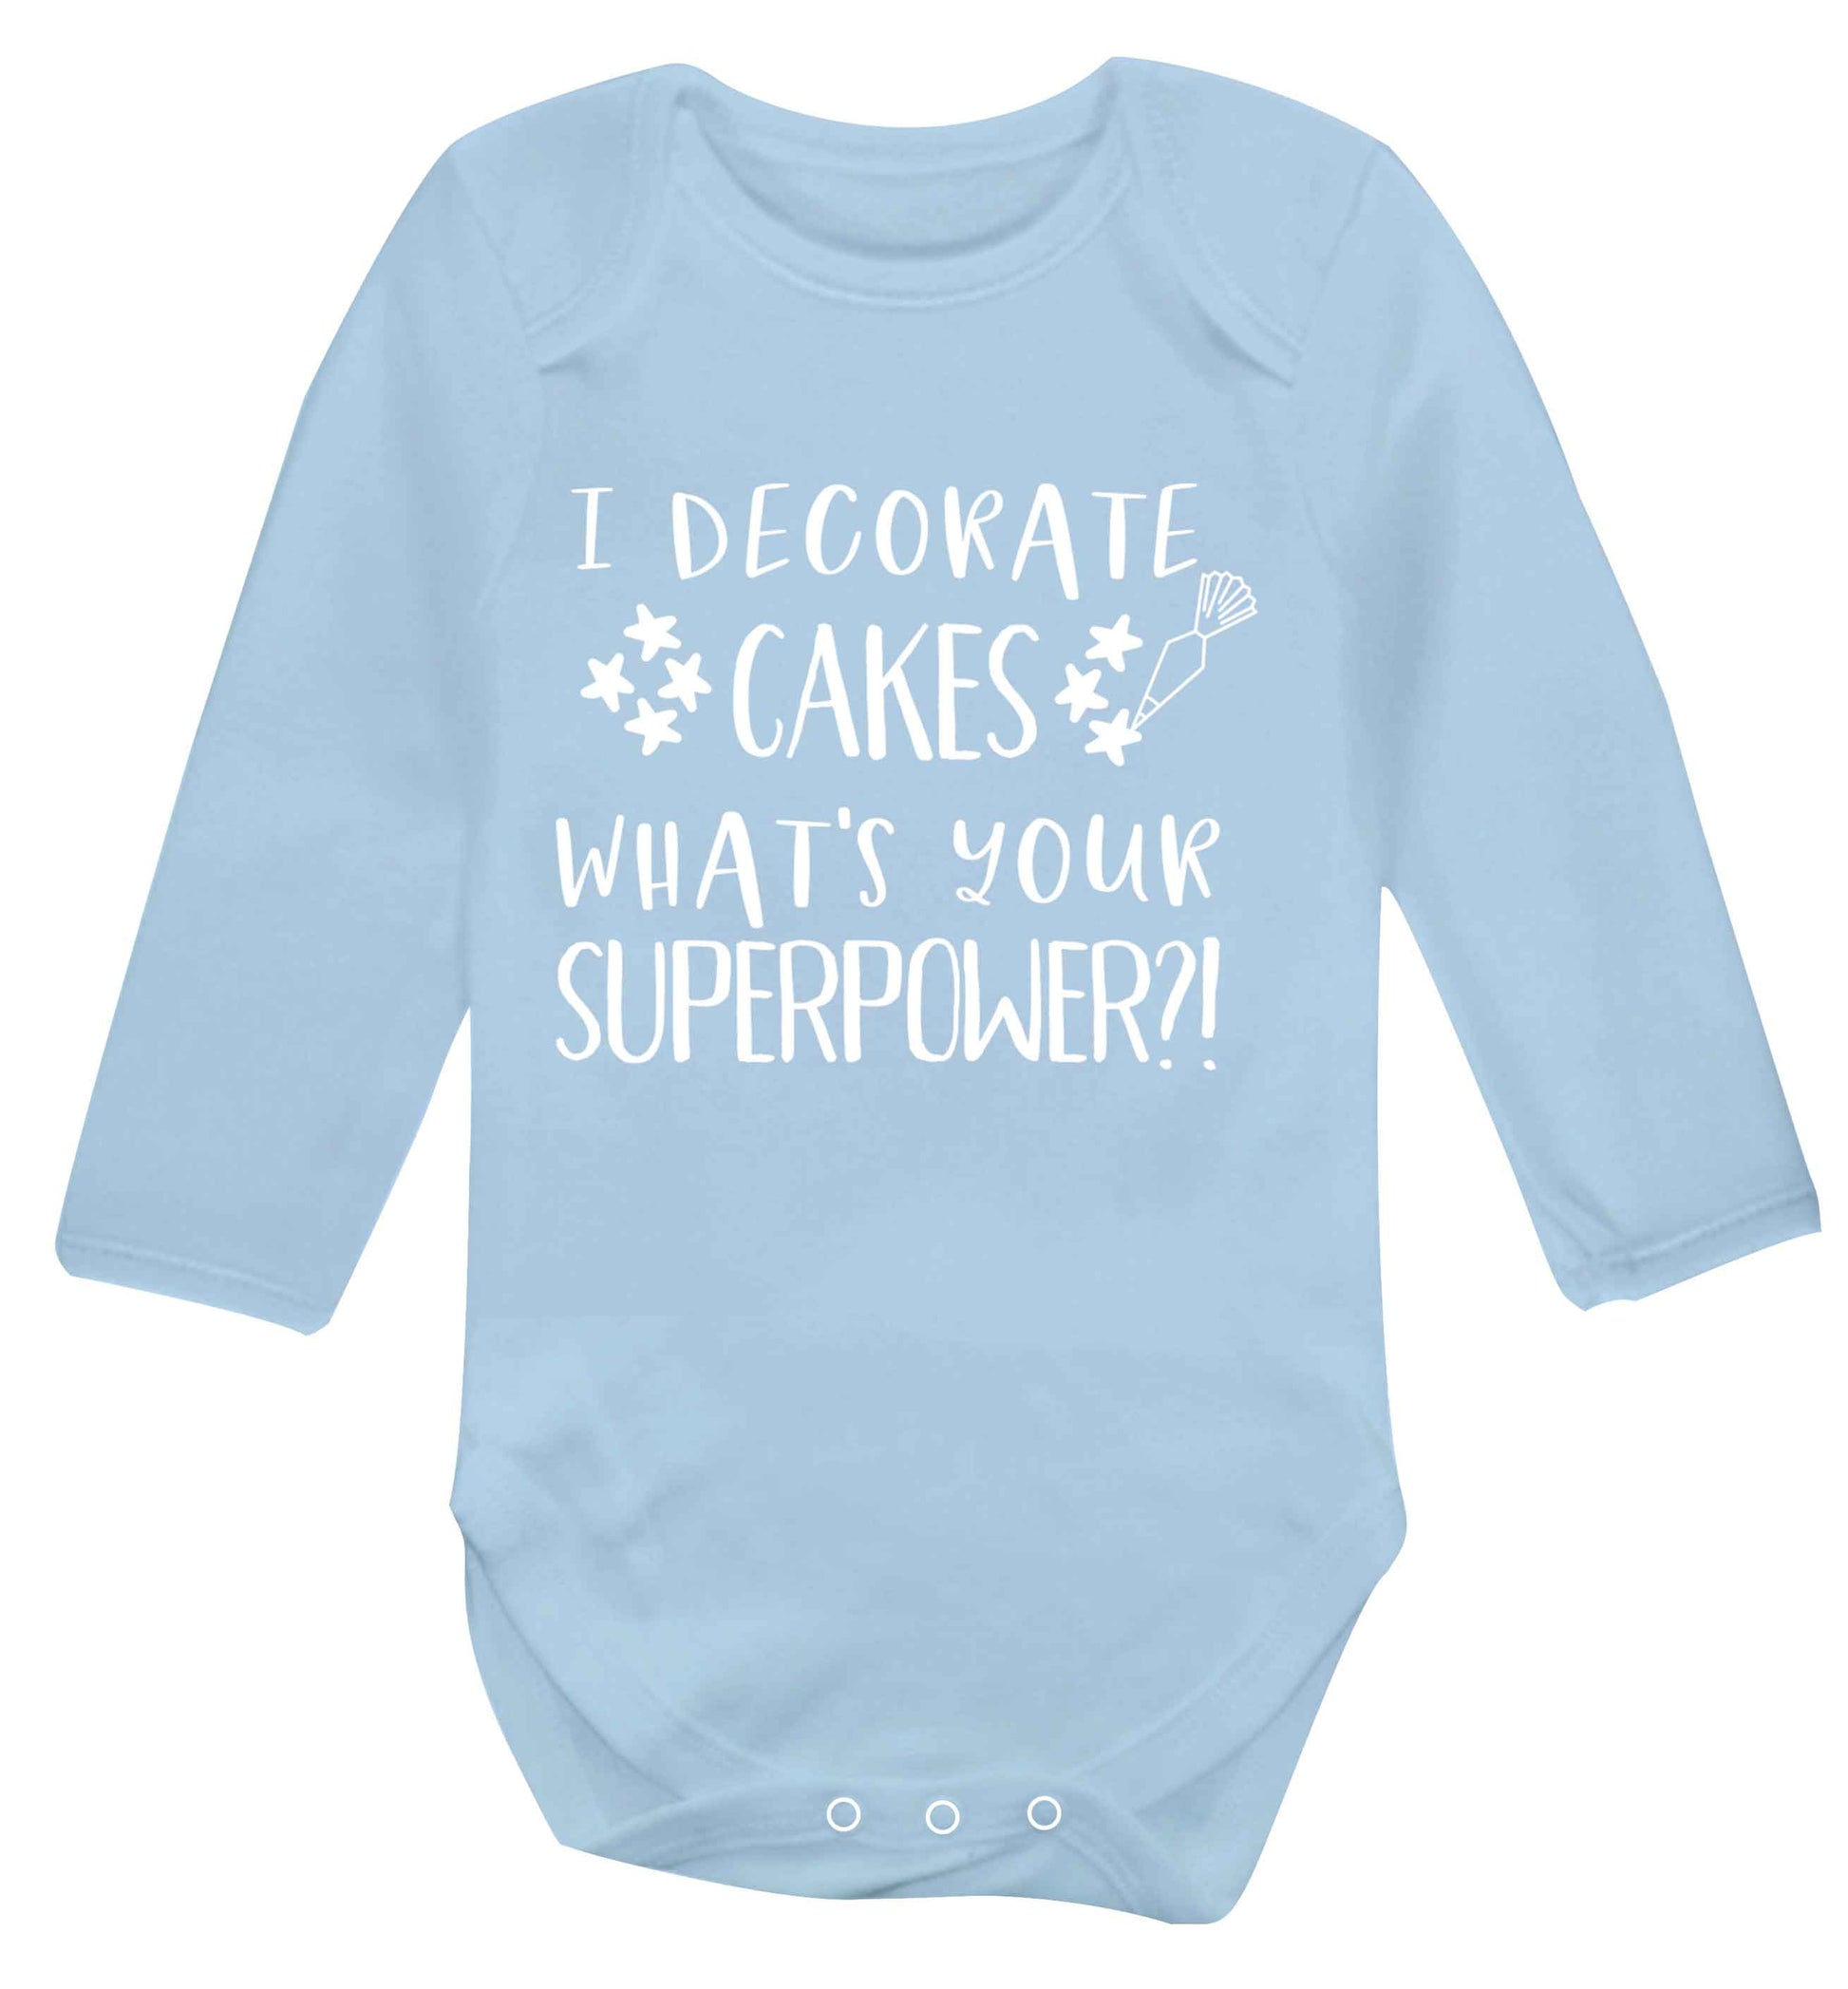 I decorate cakes what's your superpower?! Baby Vest long sleeved pale blue 6-12 months